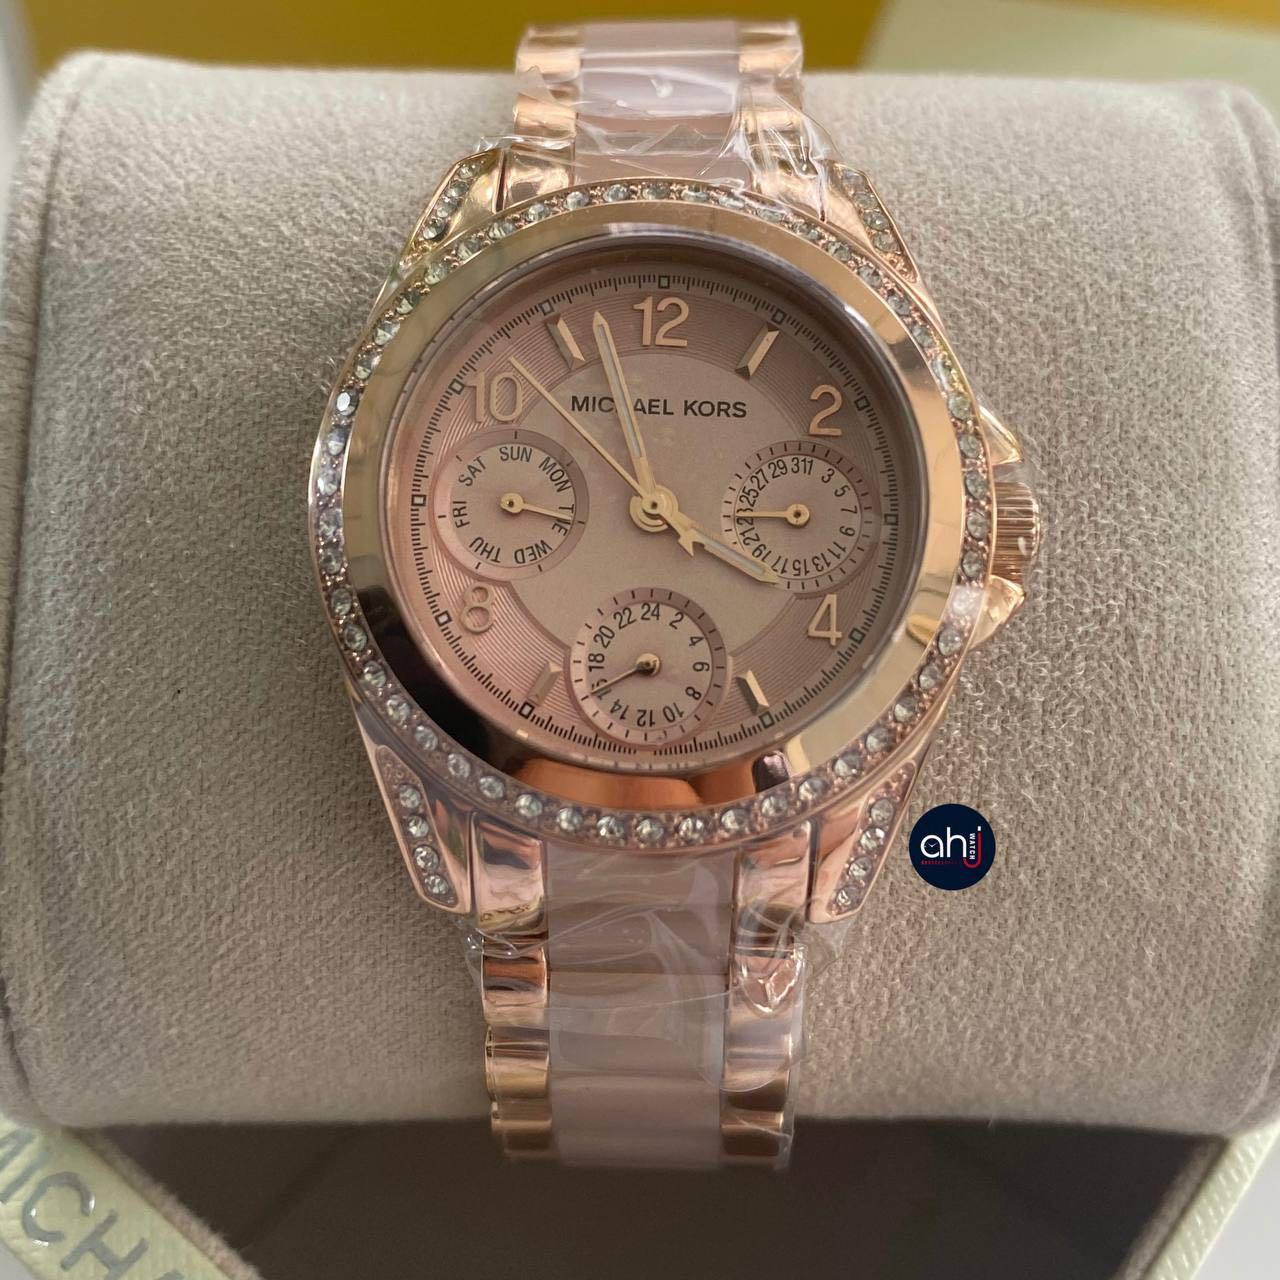 RESTOCK]? ORIGINAL MICHAEL KORS JET BLAIR ROSE DIAL ROSEGOLD LADIES WATCH  MK6175, Women's Fashion, Watches & Accessories, Watches on Carousell